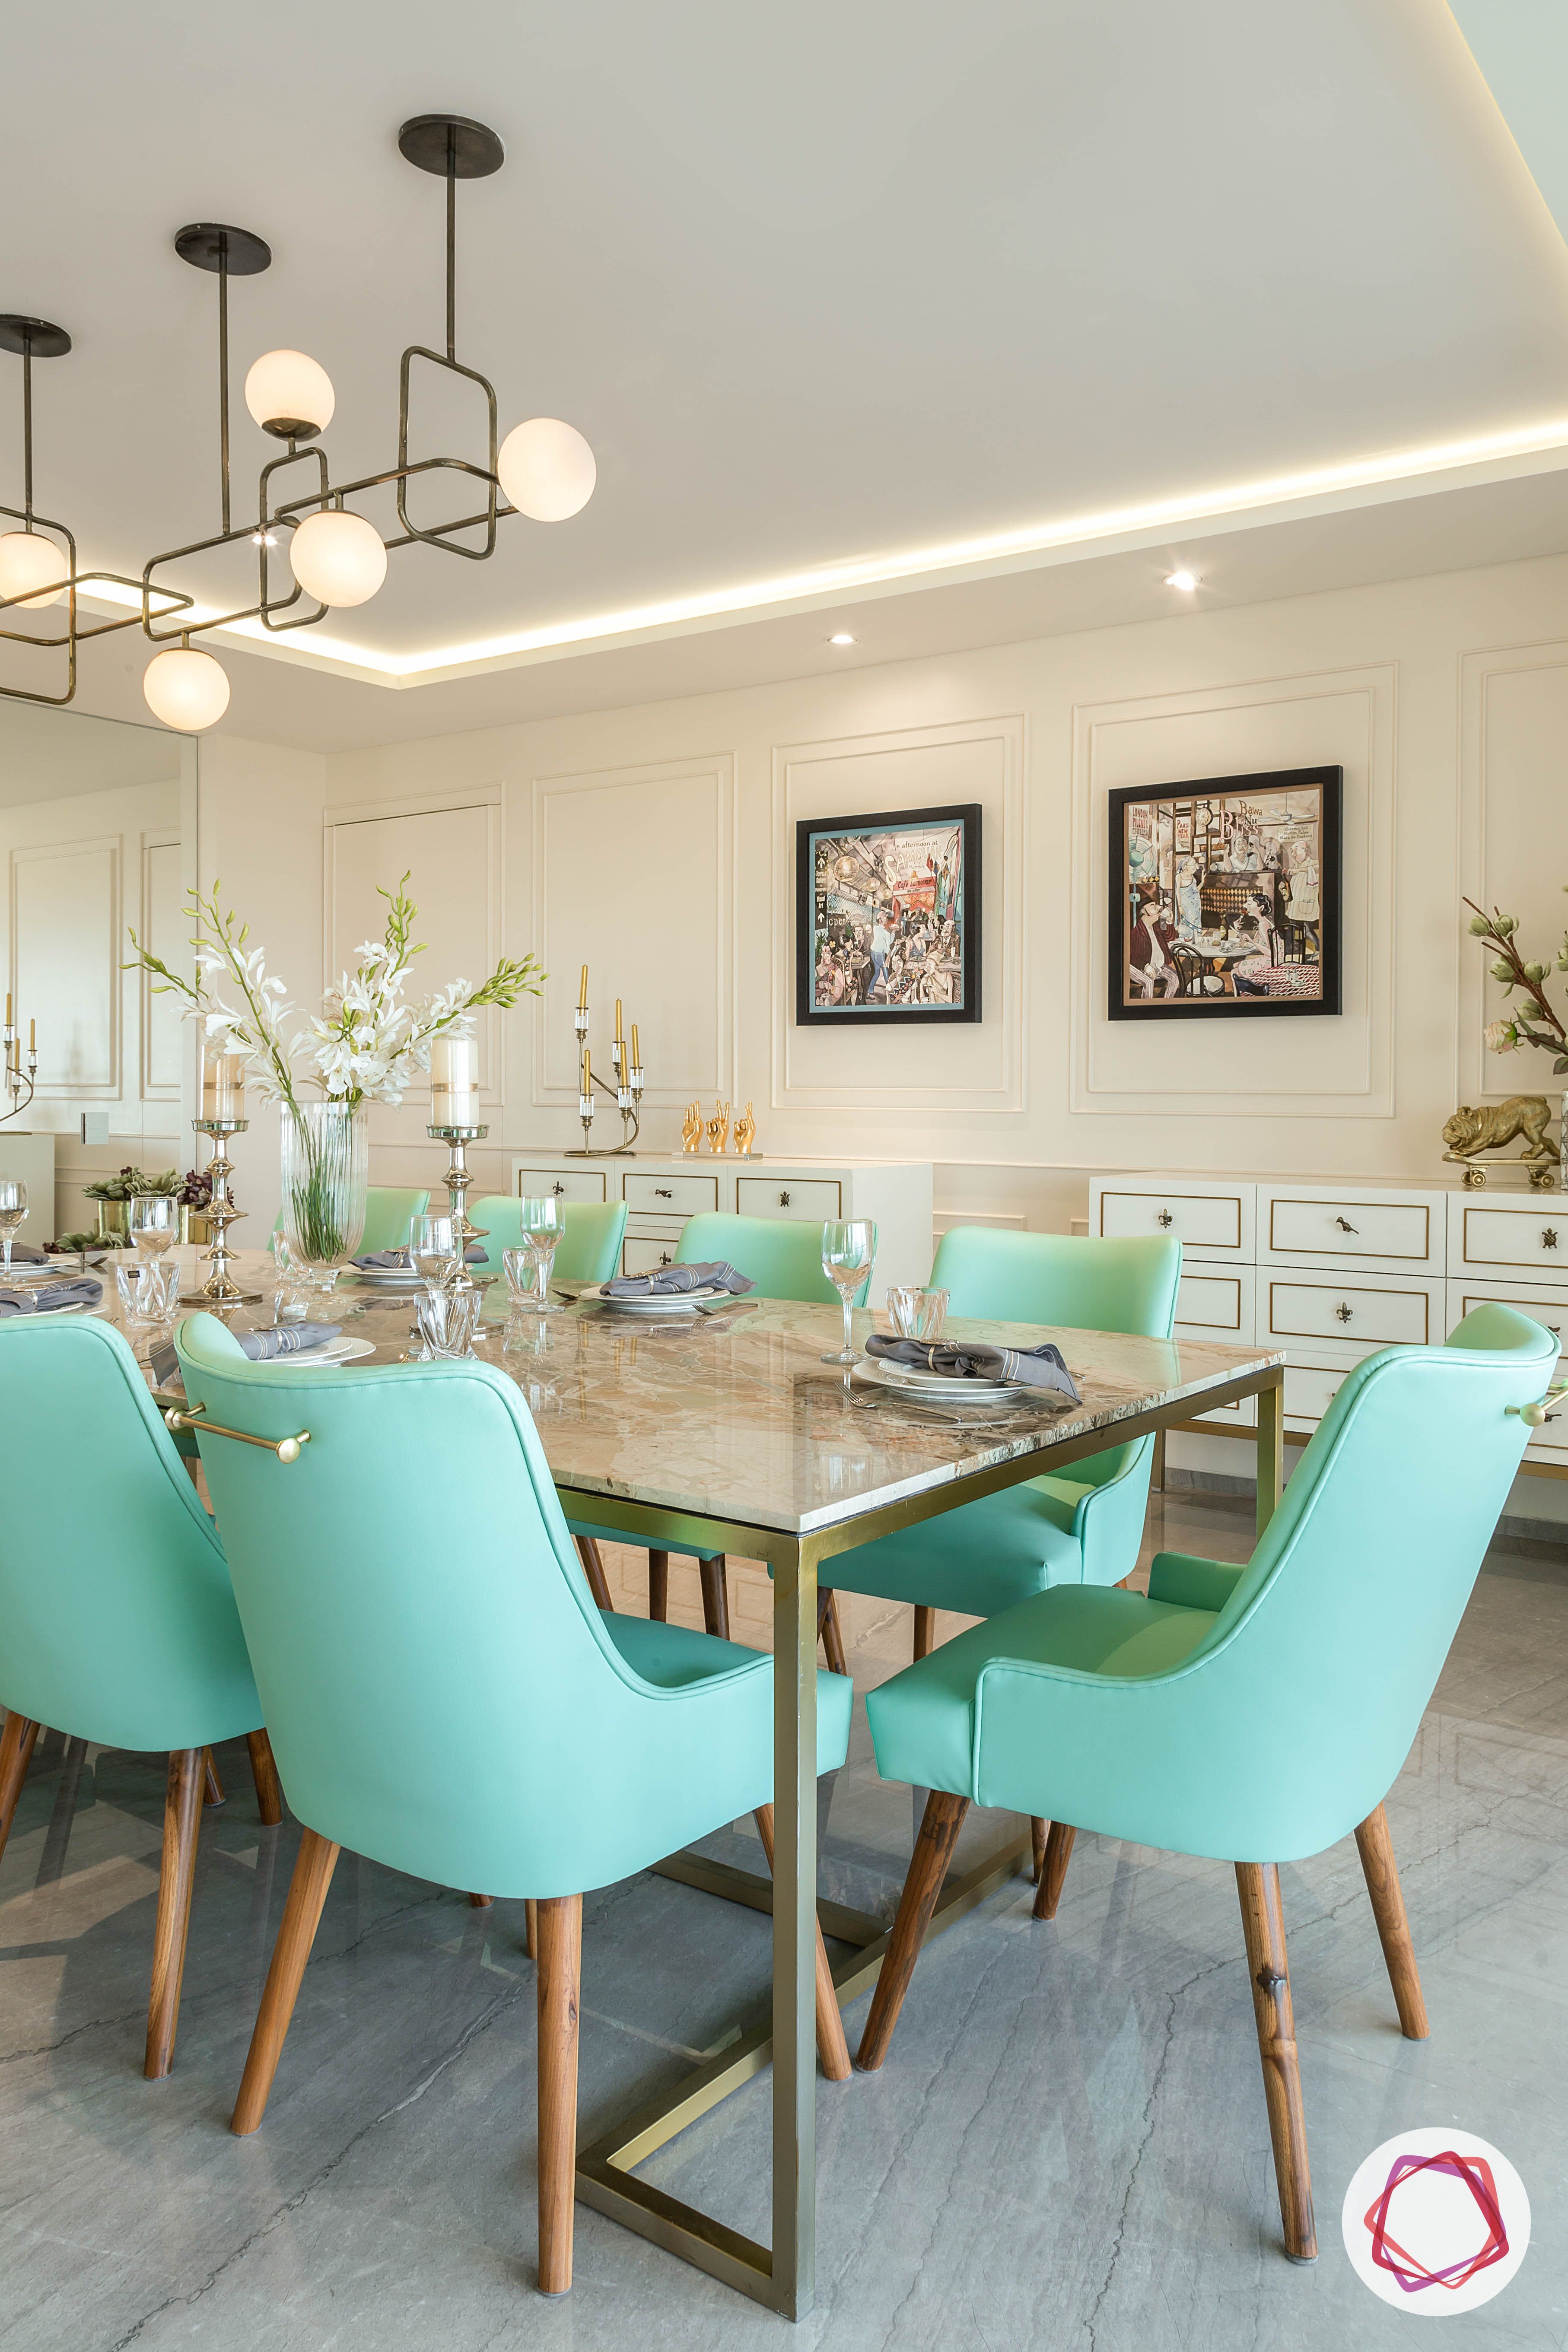 condo-interior-design-condo-interior design-mint-green-chairs-marble-table-designs